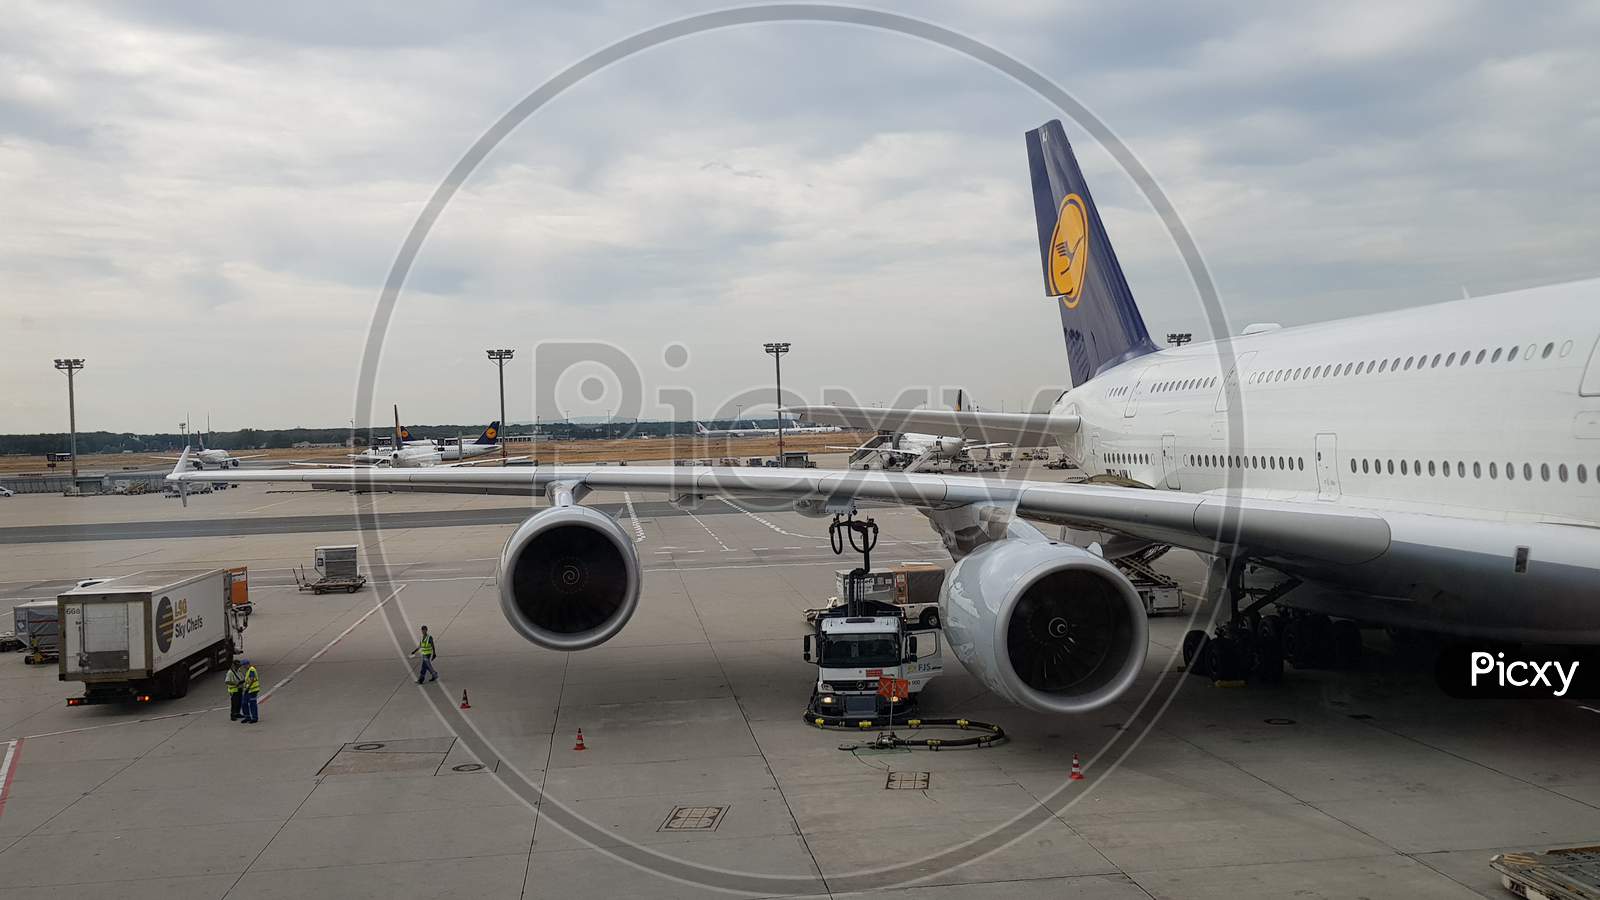 An airbus A380 aircraft getting refueled at the terminal in Frankfurt airport during day time